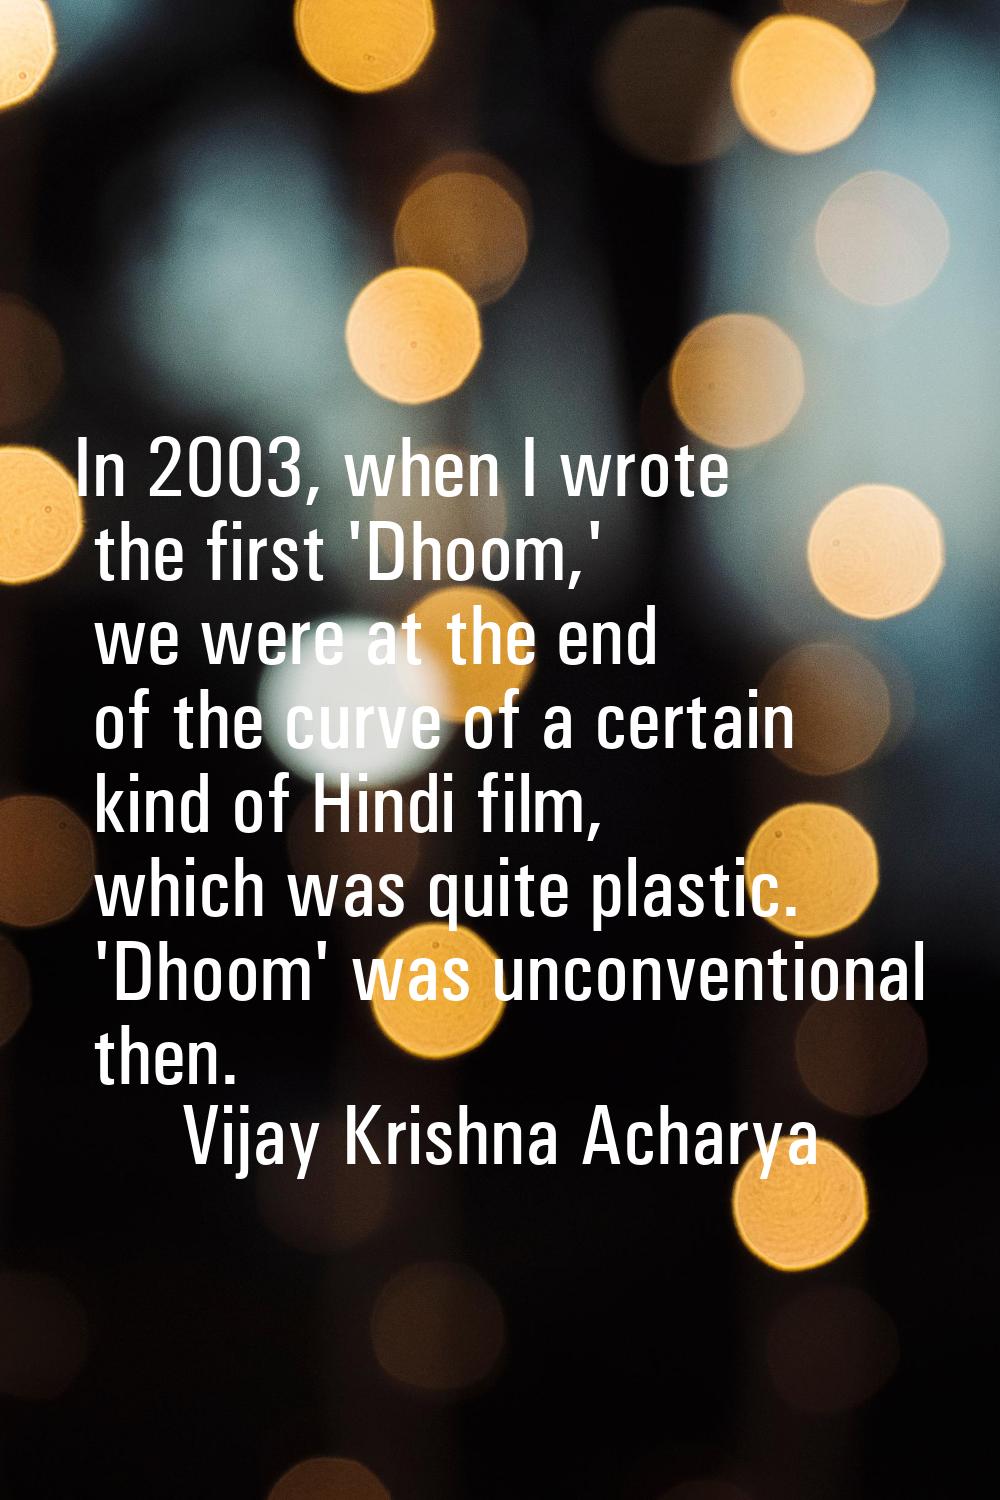 In 2003, when I wrote the first 'Dhoom,' we were at the end of the curve of a certain kind of Hindi